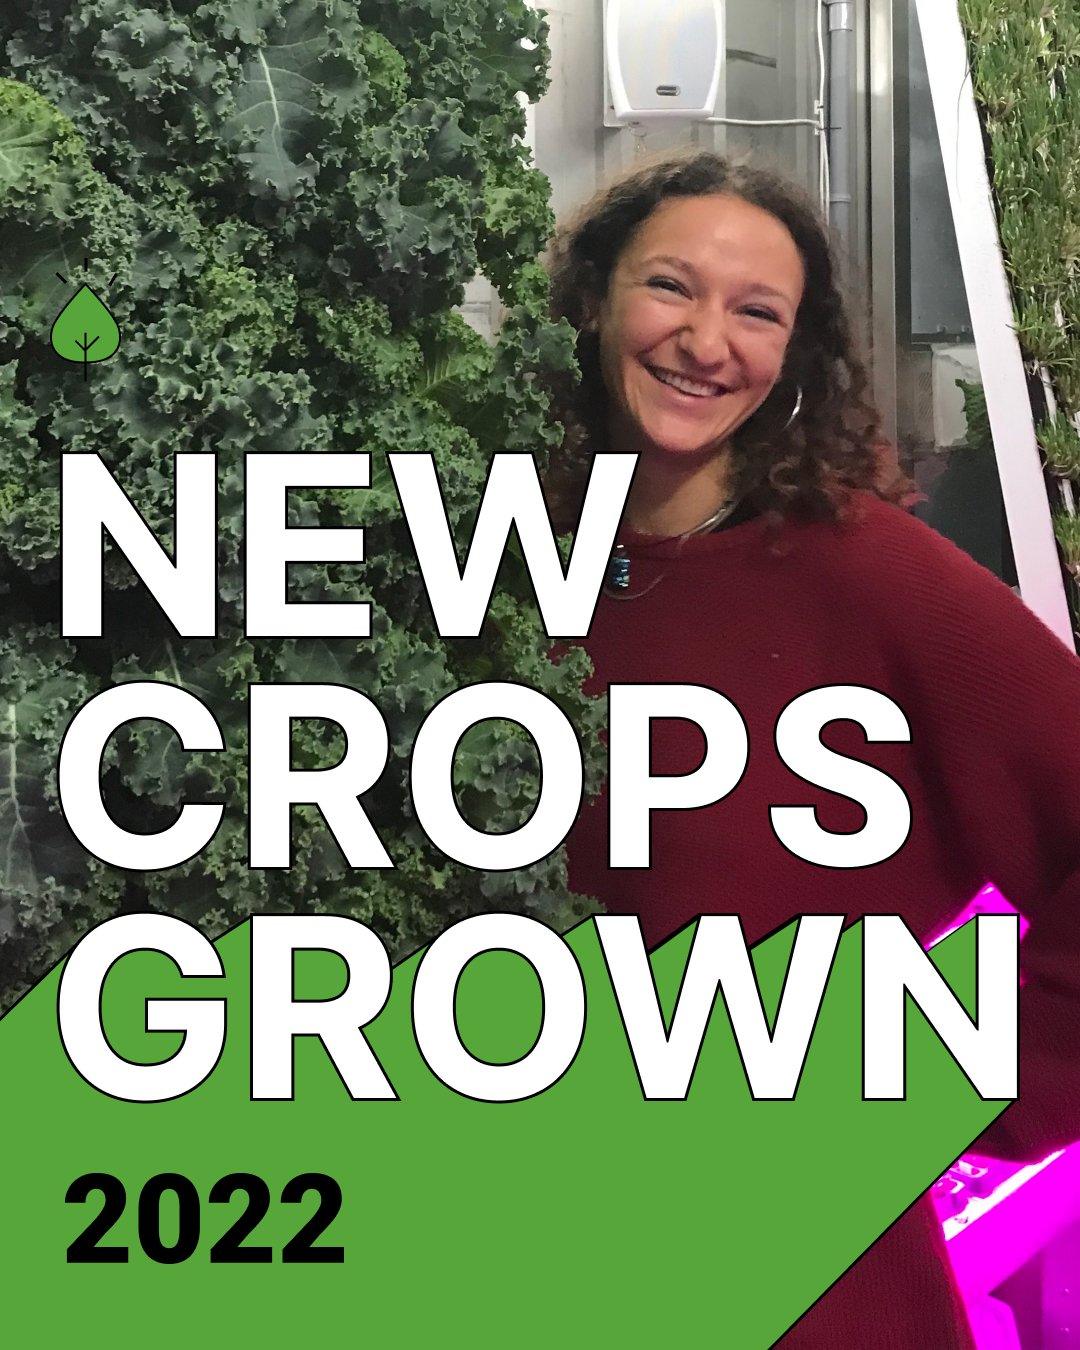 New Crops Grown in 2022